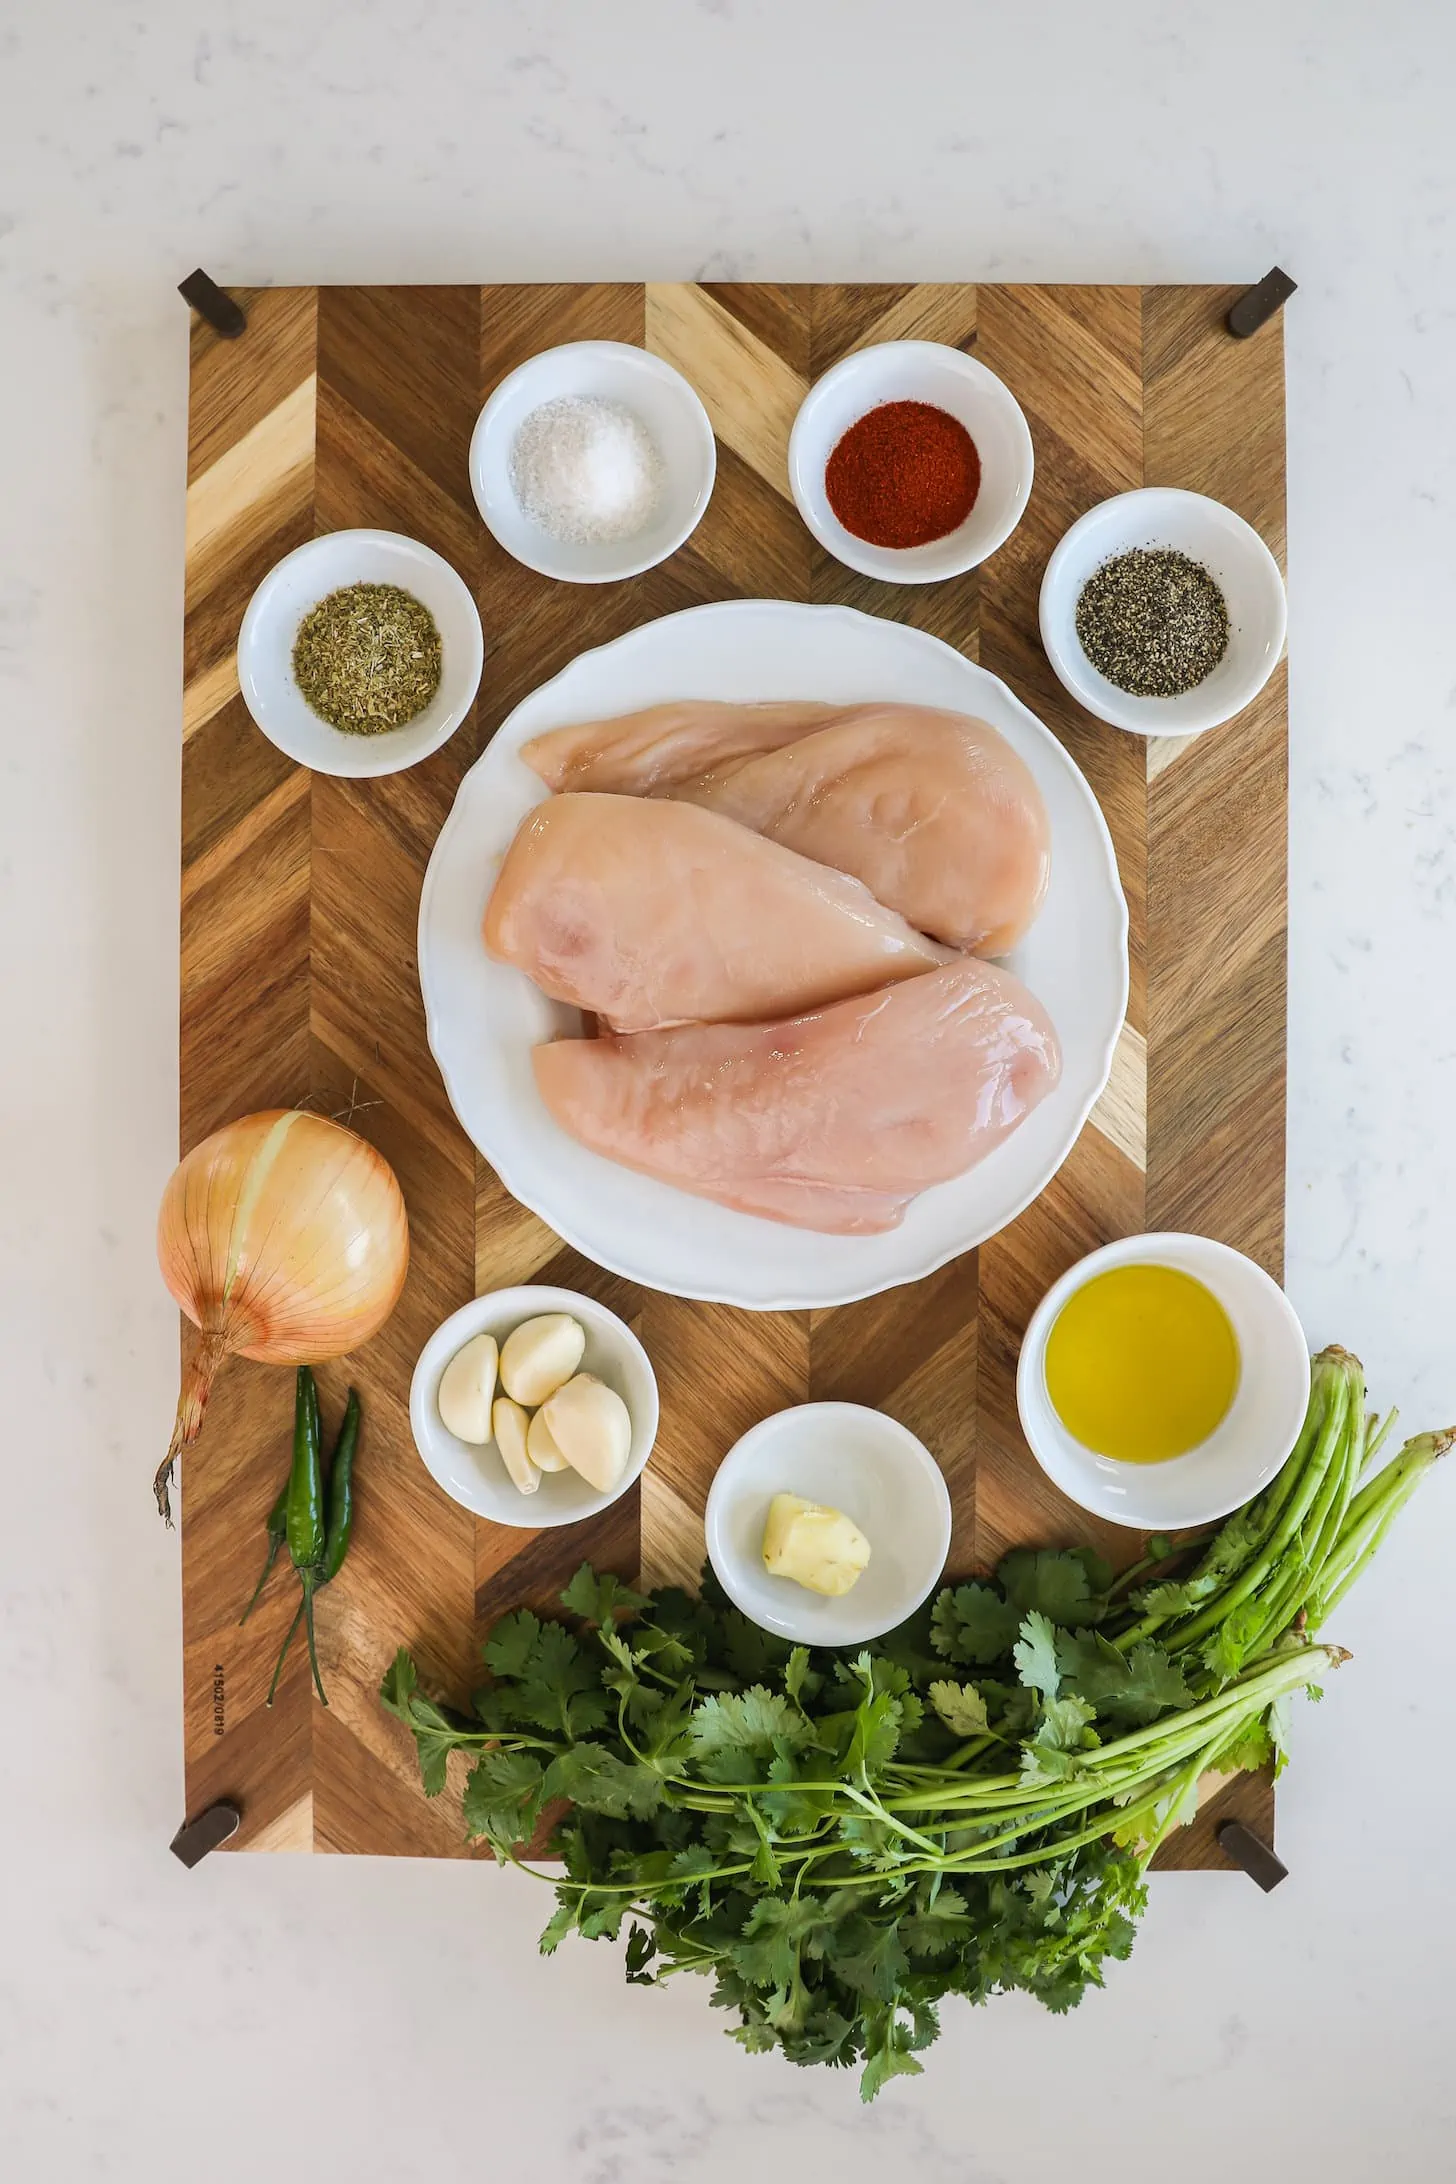 a wooden board with food ingredients arranged on it including raw chicken breast, herbs, spices and oil.